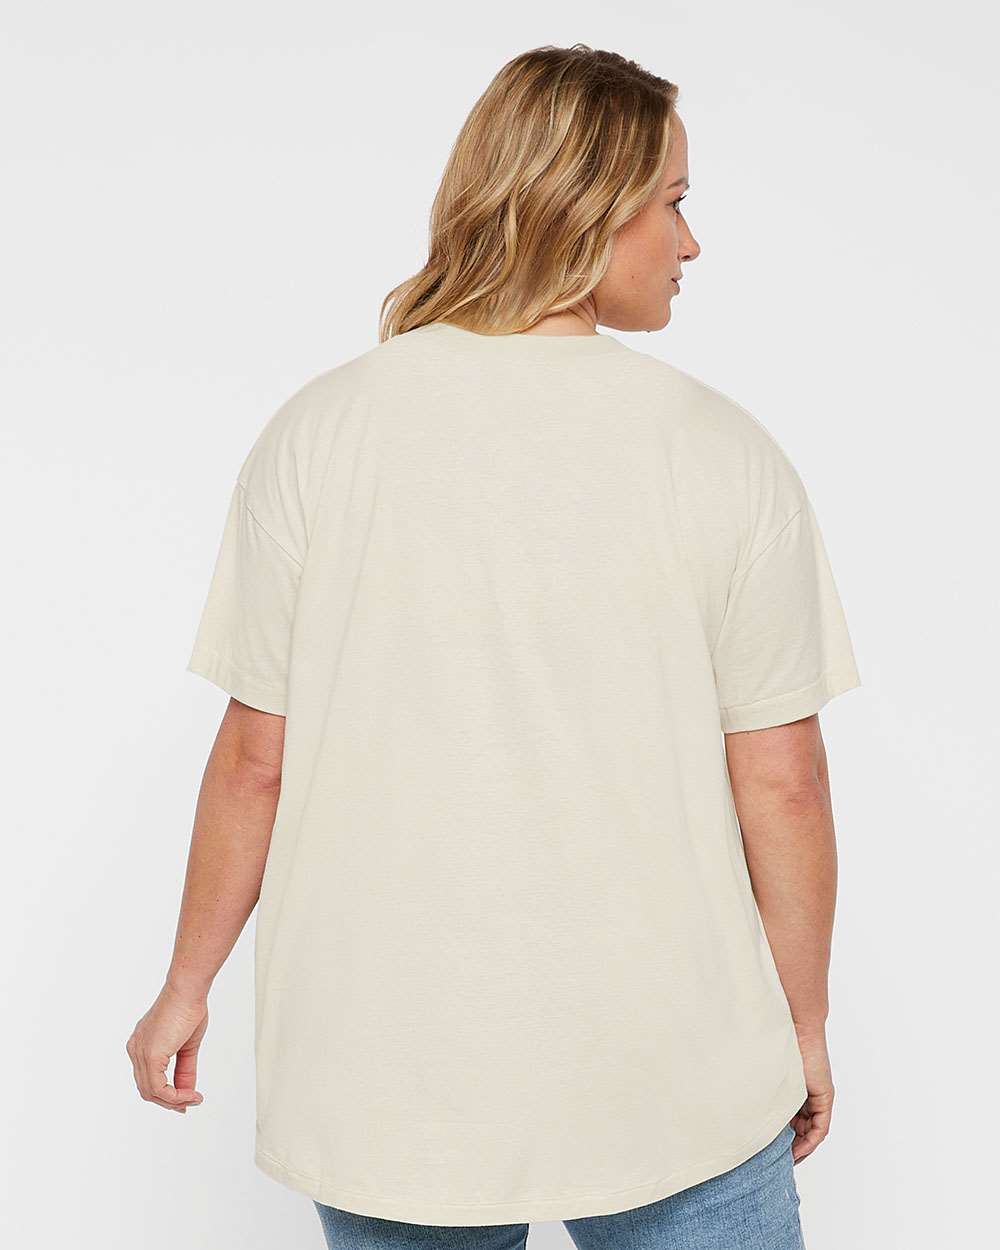 Back view of the oversized HiLo cream shirt